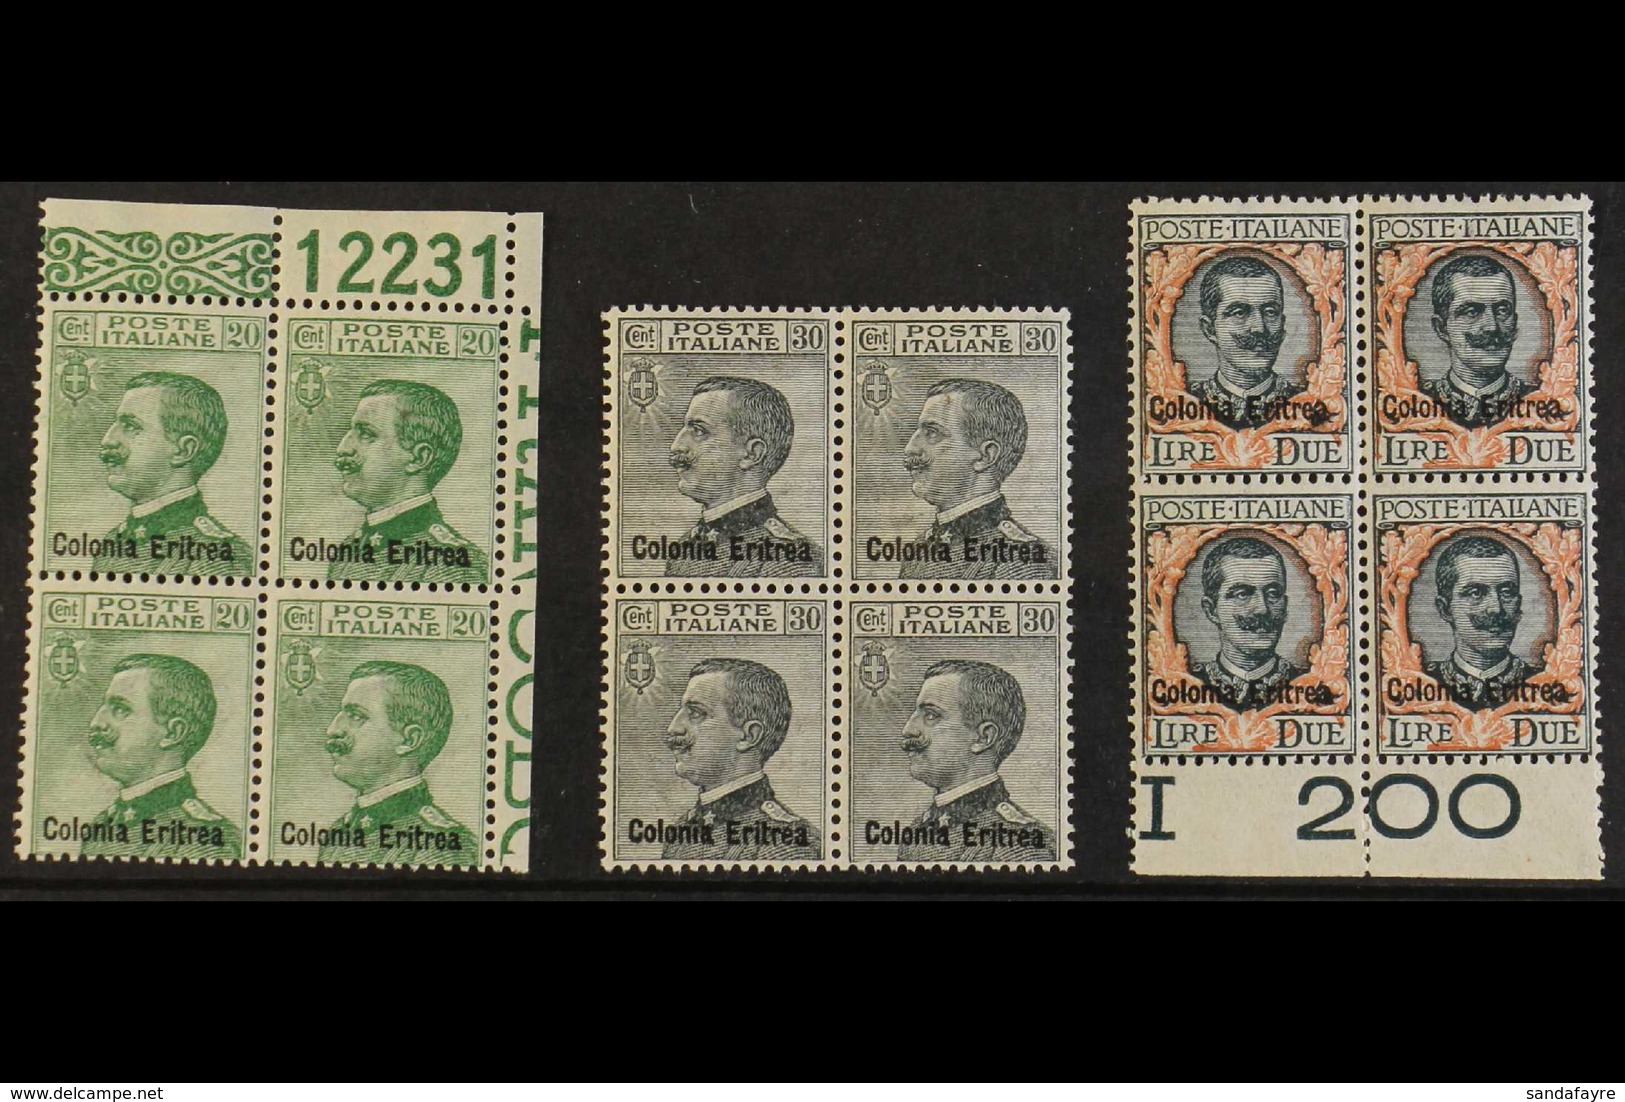 1925 20c To 2L Ovptd "Colonia Eritrea", Sass S20, In Never Hinged Mint Blocks Of 4. Cat 2200 Euro. (£1800+), 20c Is Corn - Eritrea